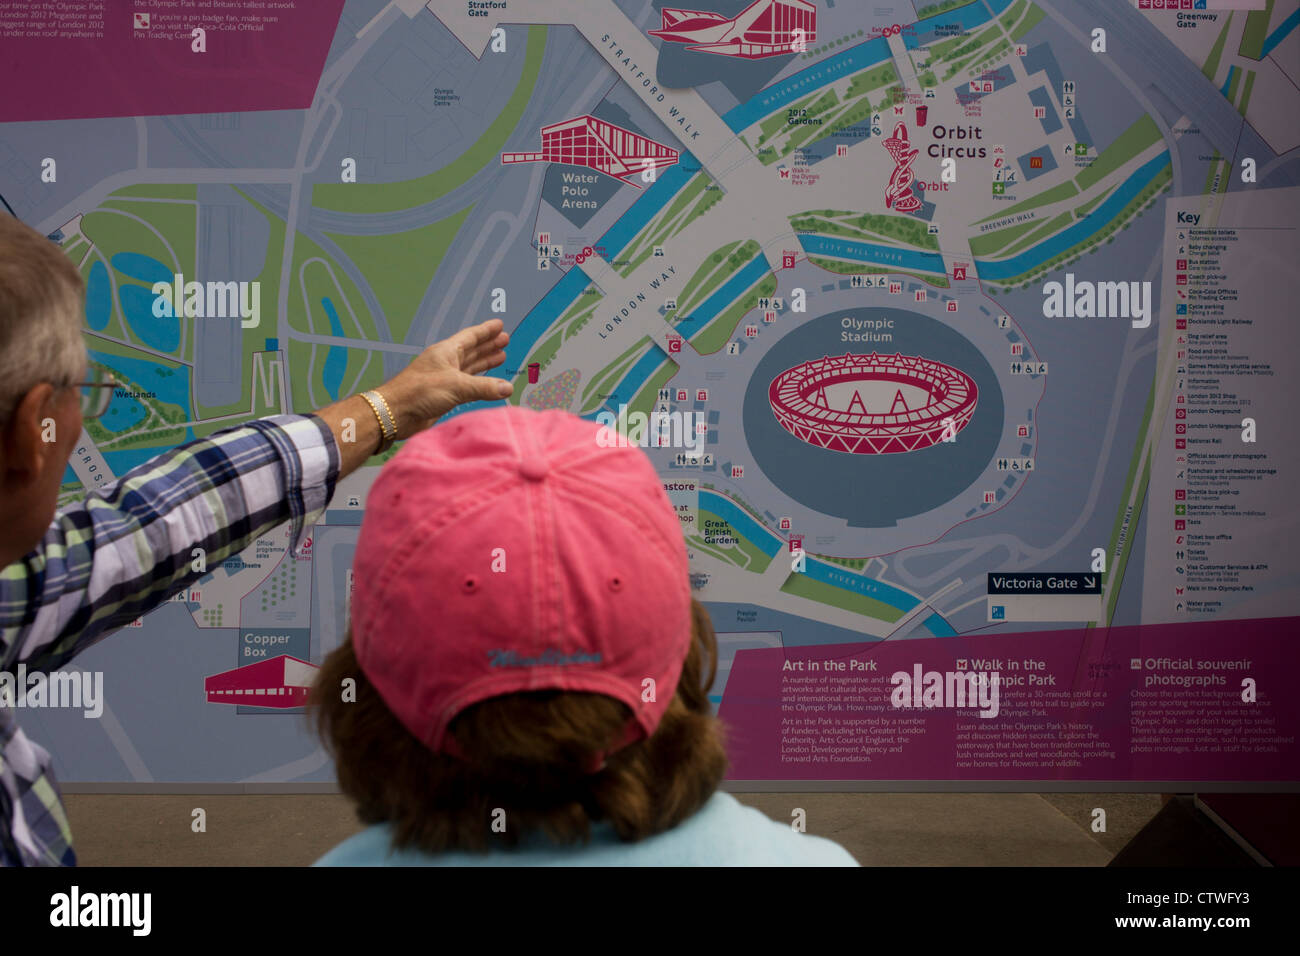 Spectators Consult A Detailed Map Of The Olympic Park During The London CTWFY3 